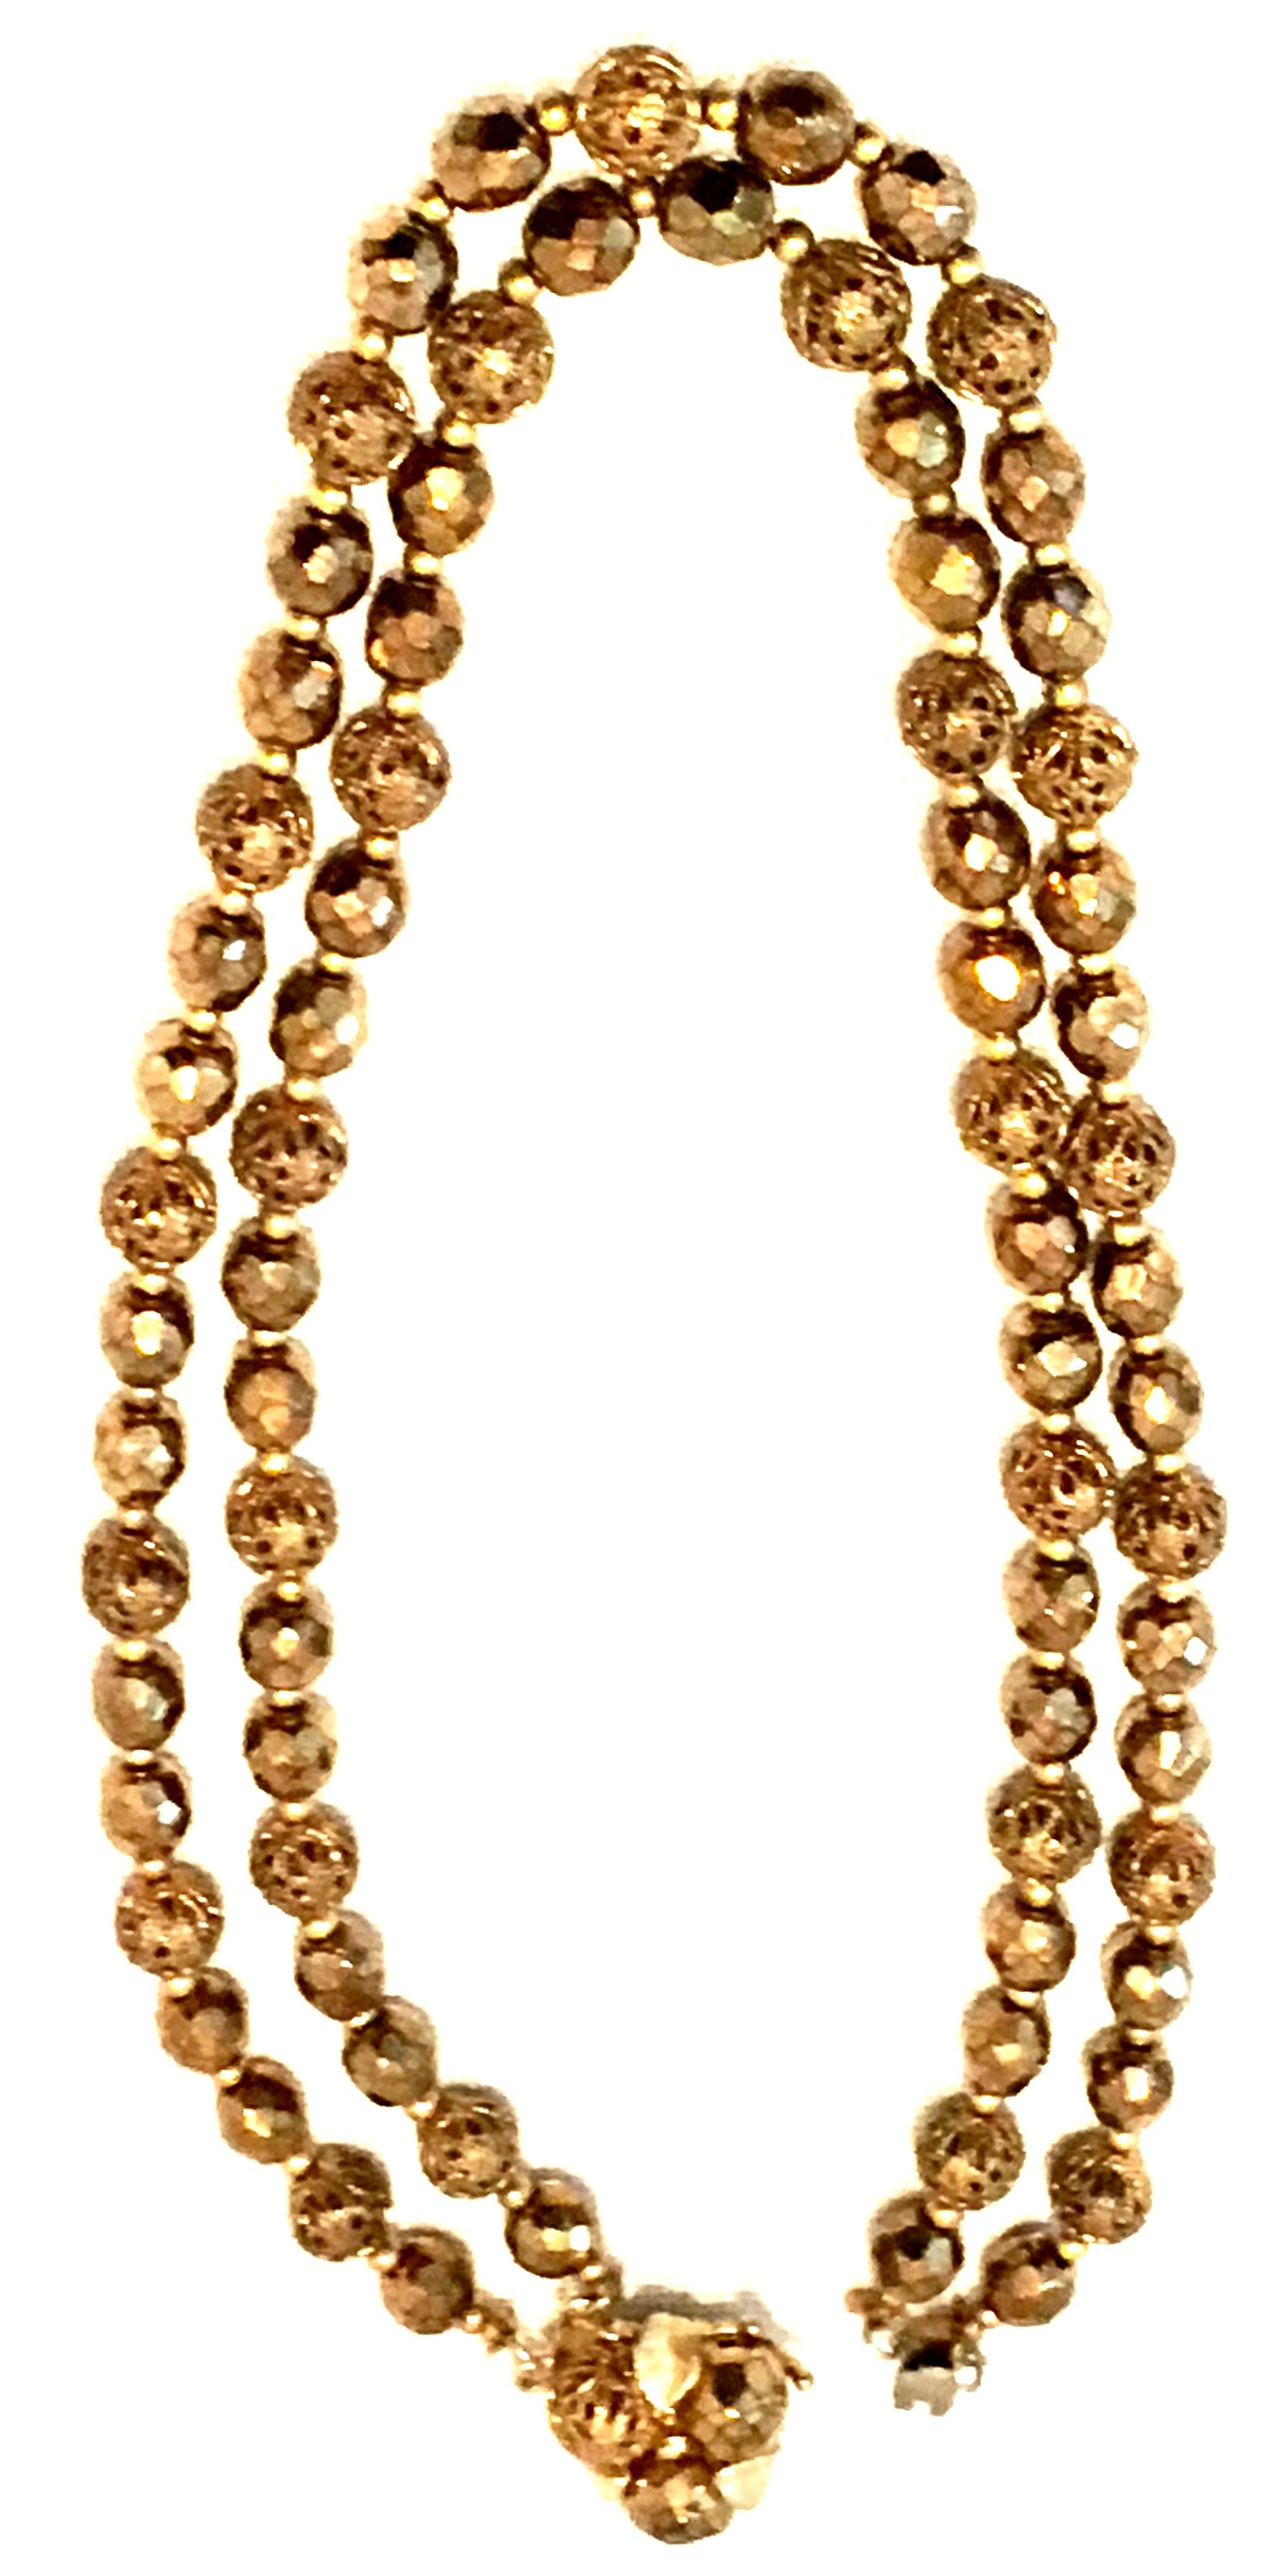 Women's or Men's Mid-20th Century Gold Bead Double Strand Choker Necklace For Sale